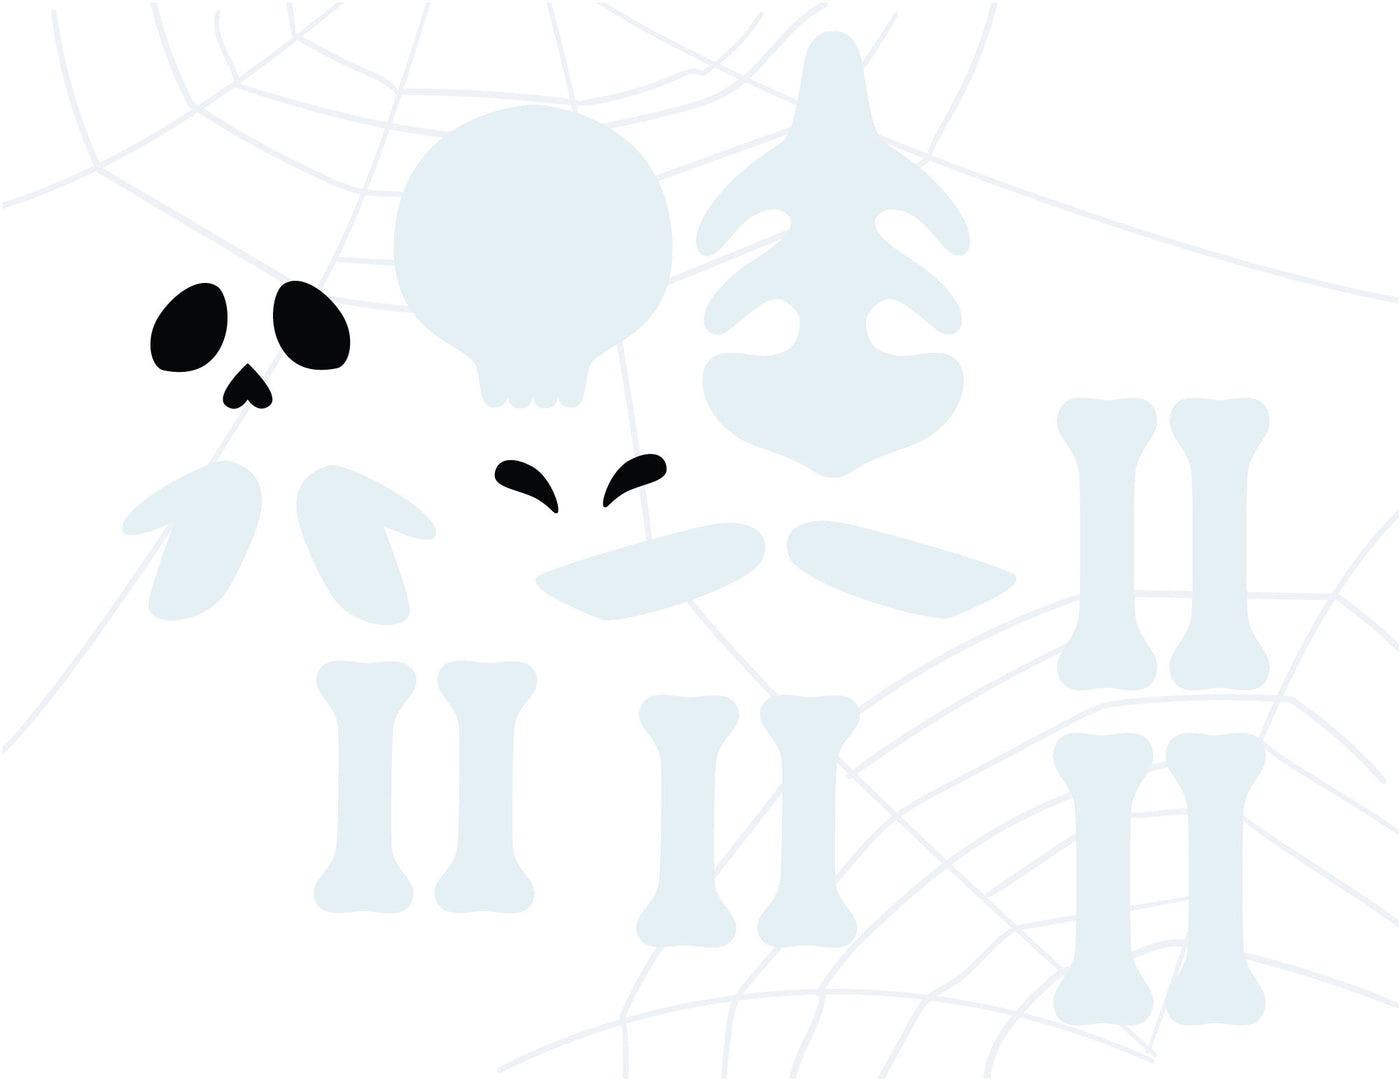 Jointed Skeleton and Spider Halloween paper doll cut files